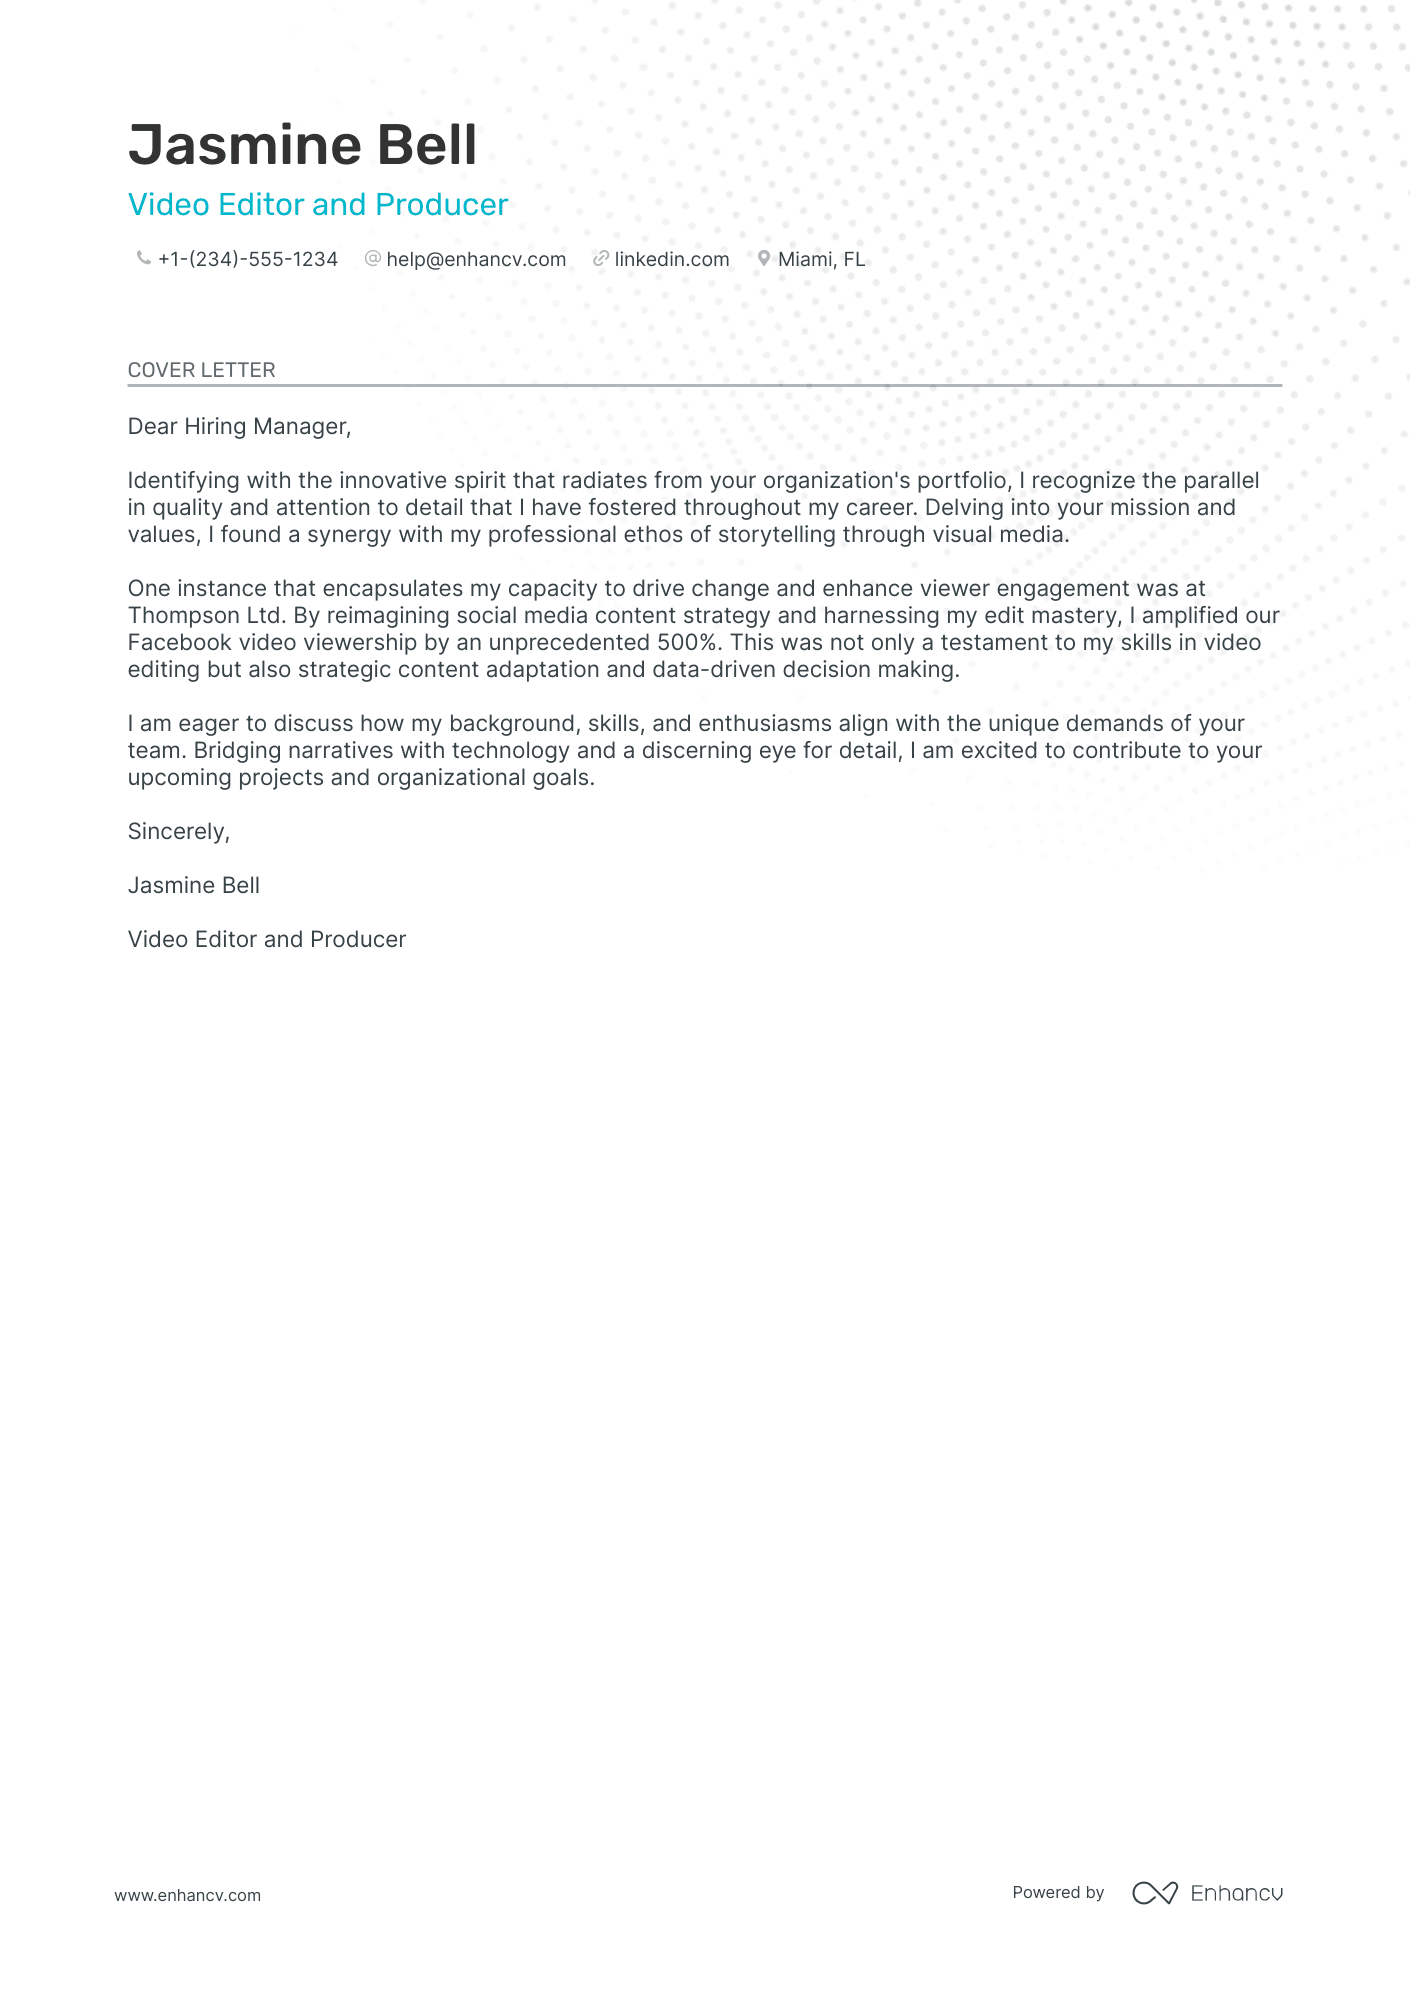 Video Editor cover letter